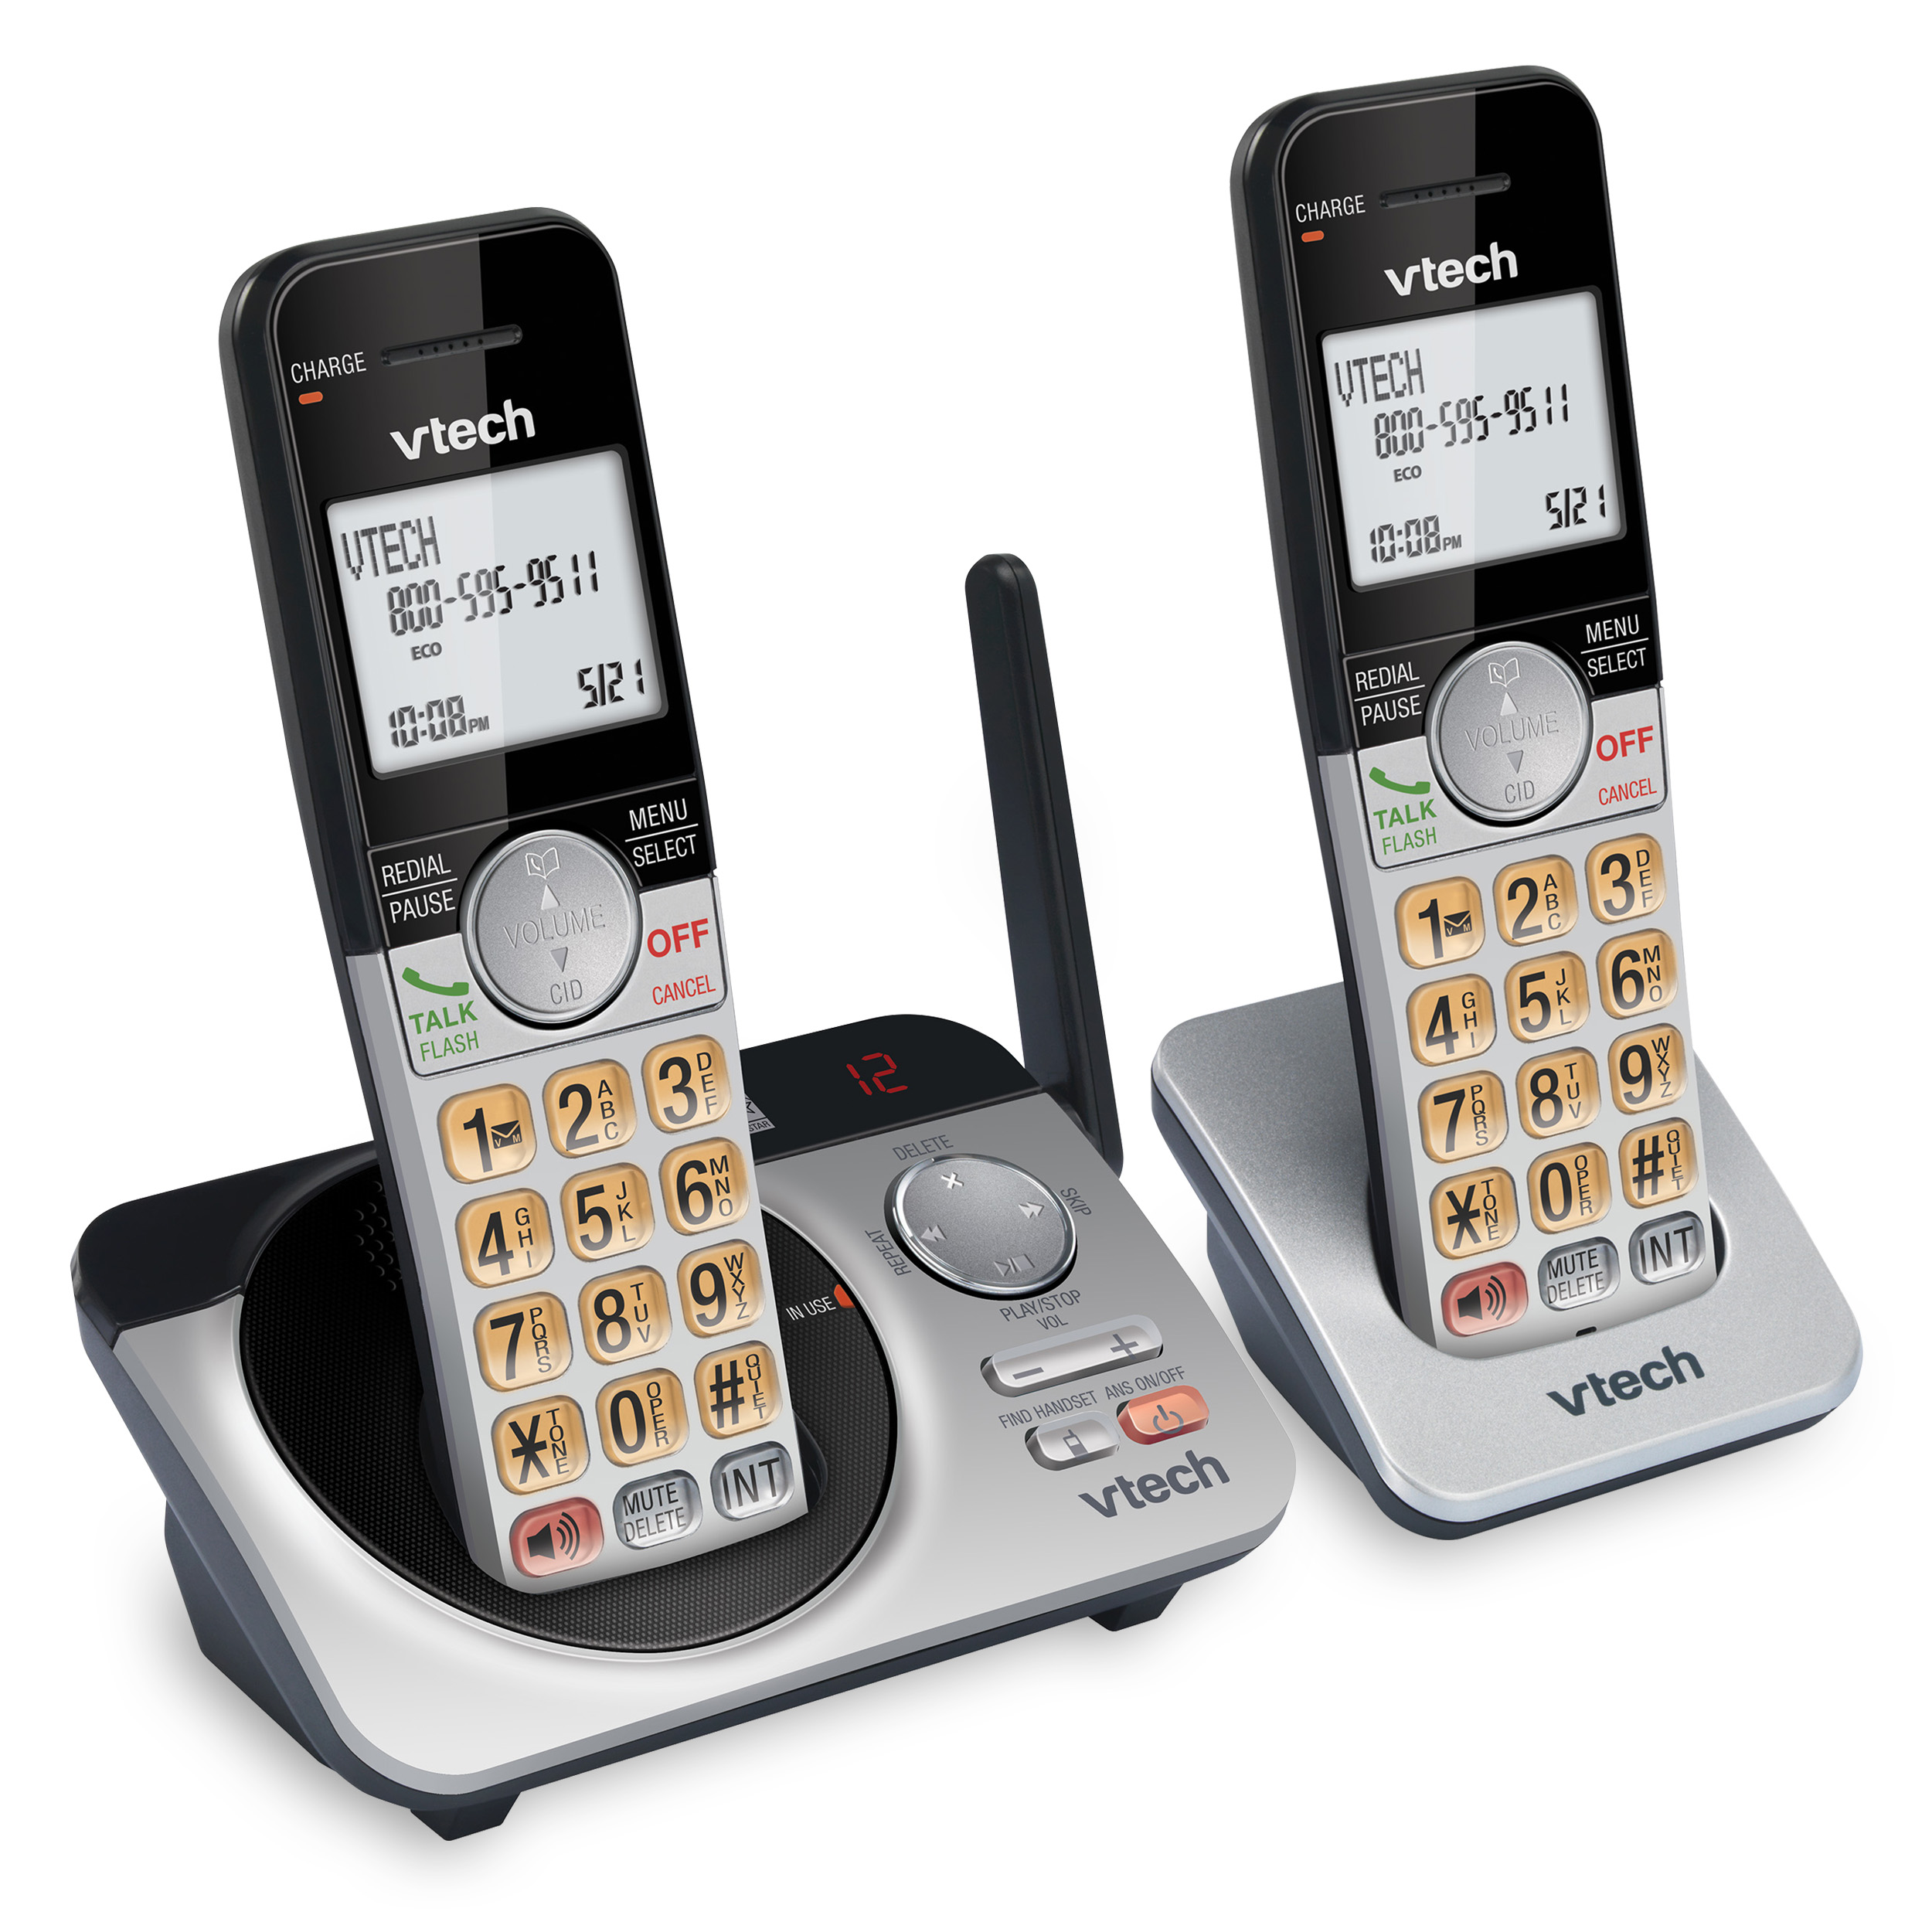 VTech CS5229-2 2 Handset Extended Range DECT 6.0 Cordless Phone with Answering System (Silver/Black) - image 2 of 18